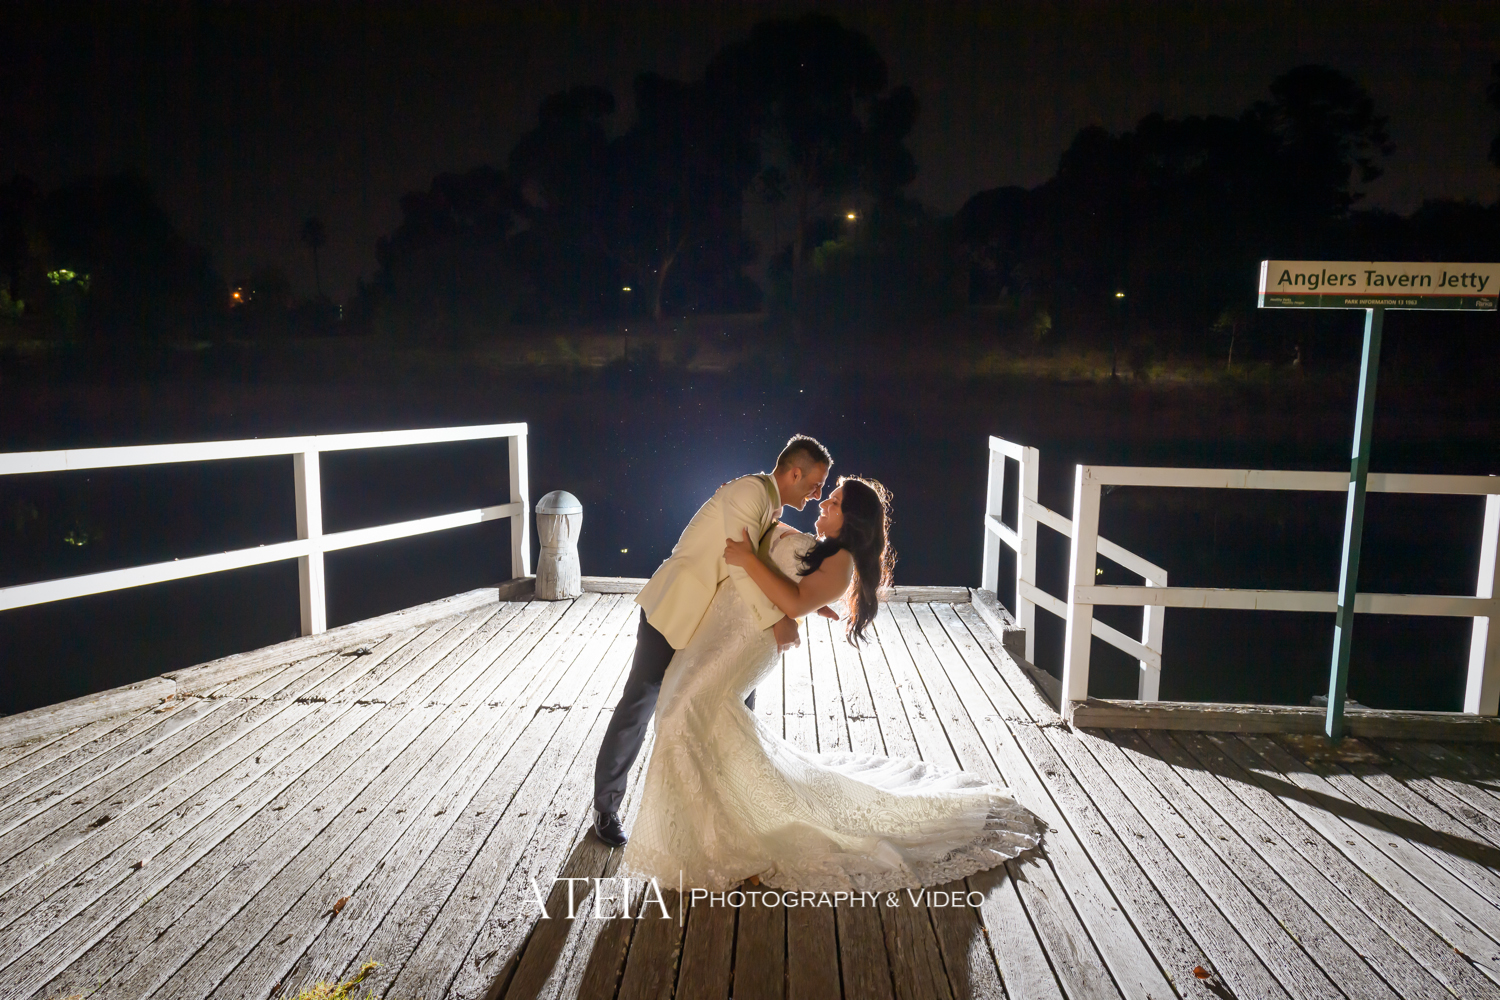 , Anglers Tavern Wedding Photography Melbourne by ATEIA Photography &#038; Video